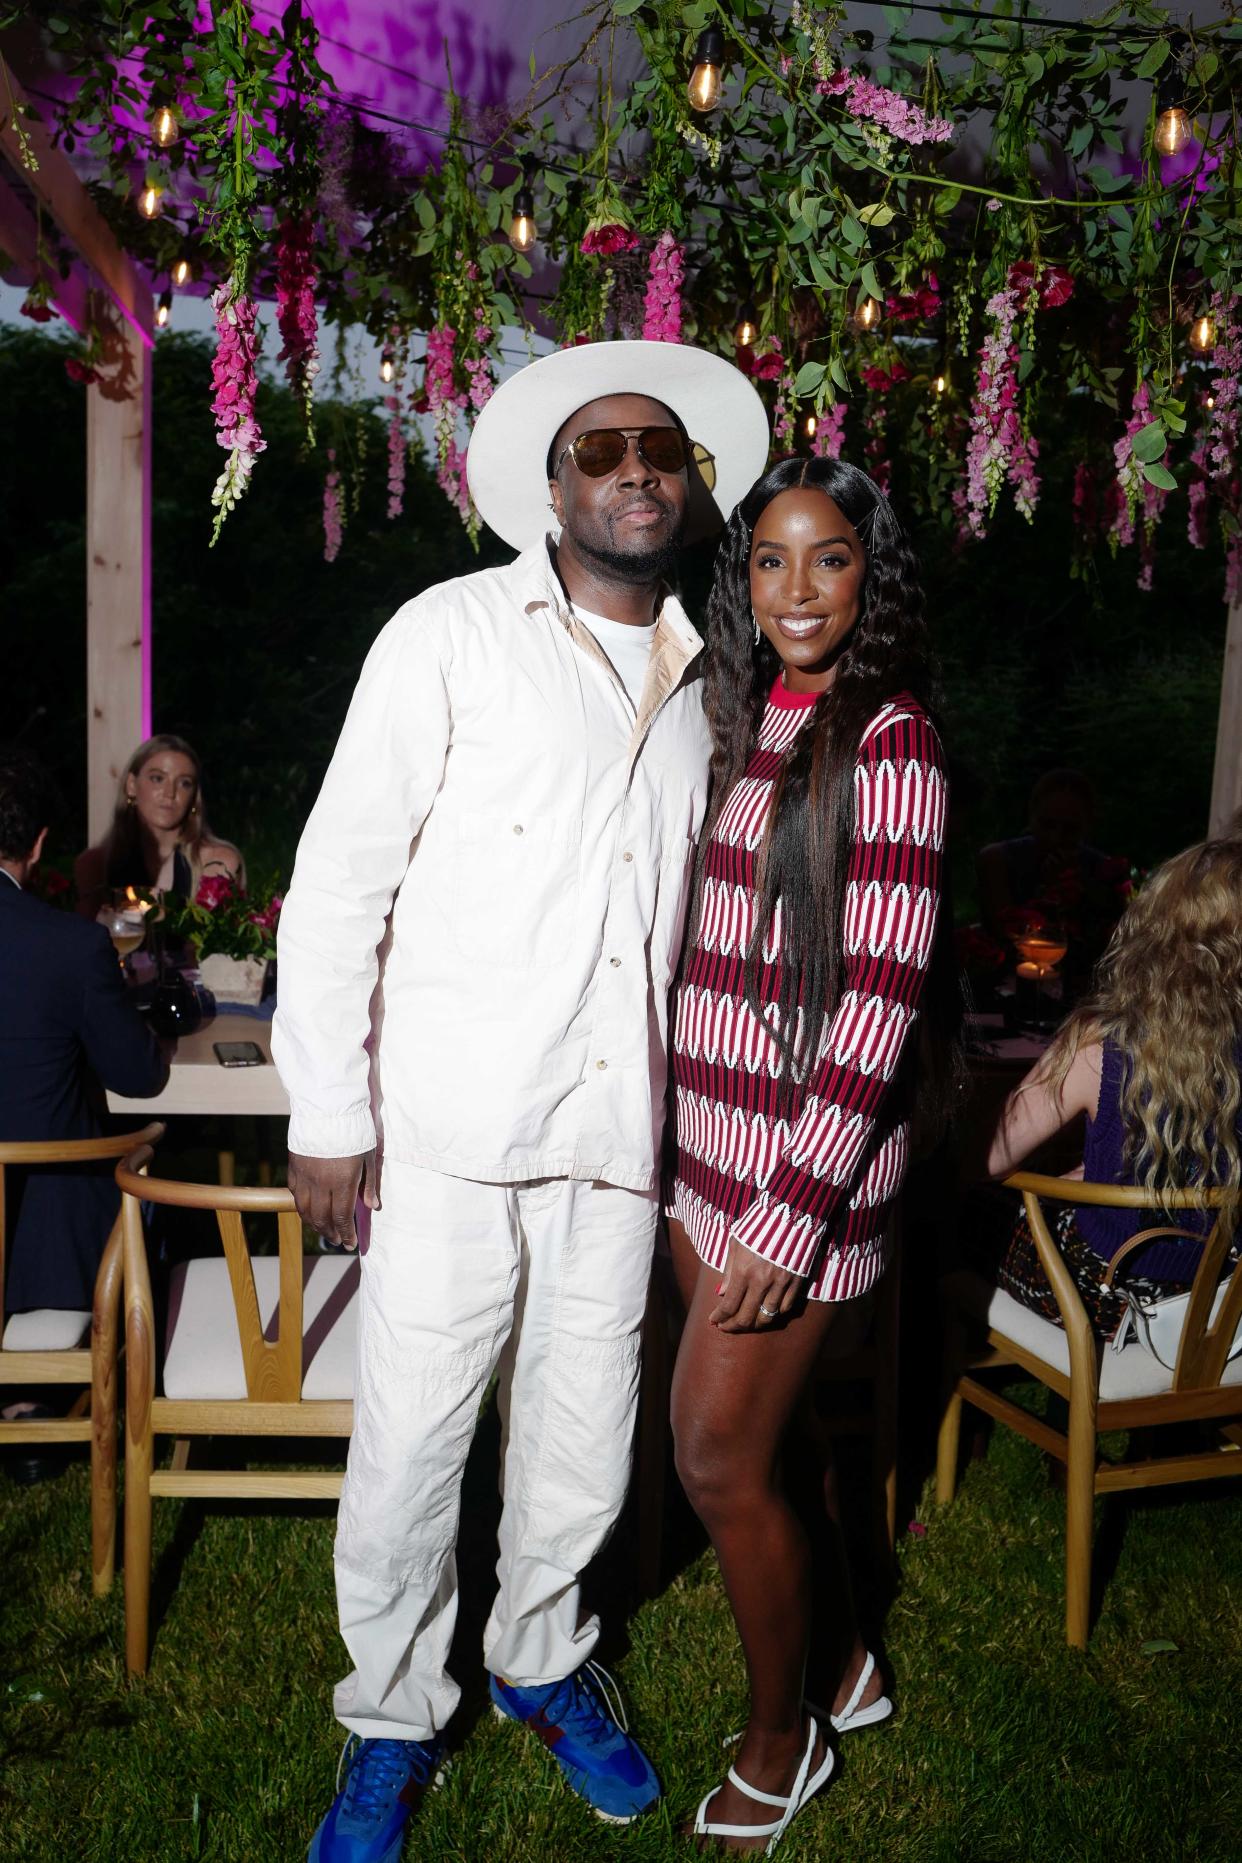 Kelly Rowland poses with Wyclef Jean at Tod’s “Summer in the Hamptons” dinner on Thursday, July 21. - Credit: BFA